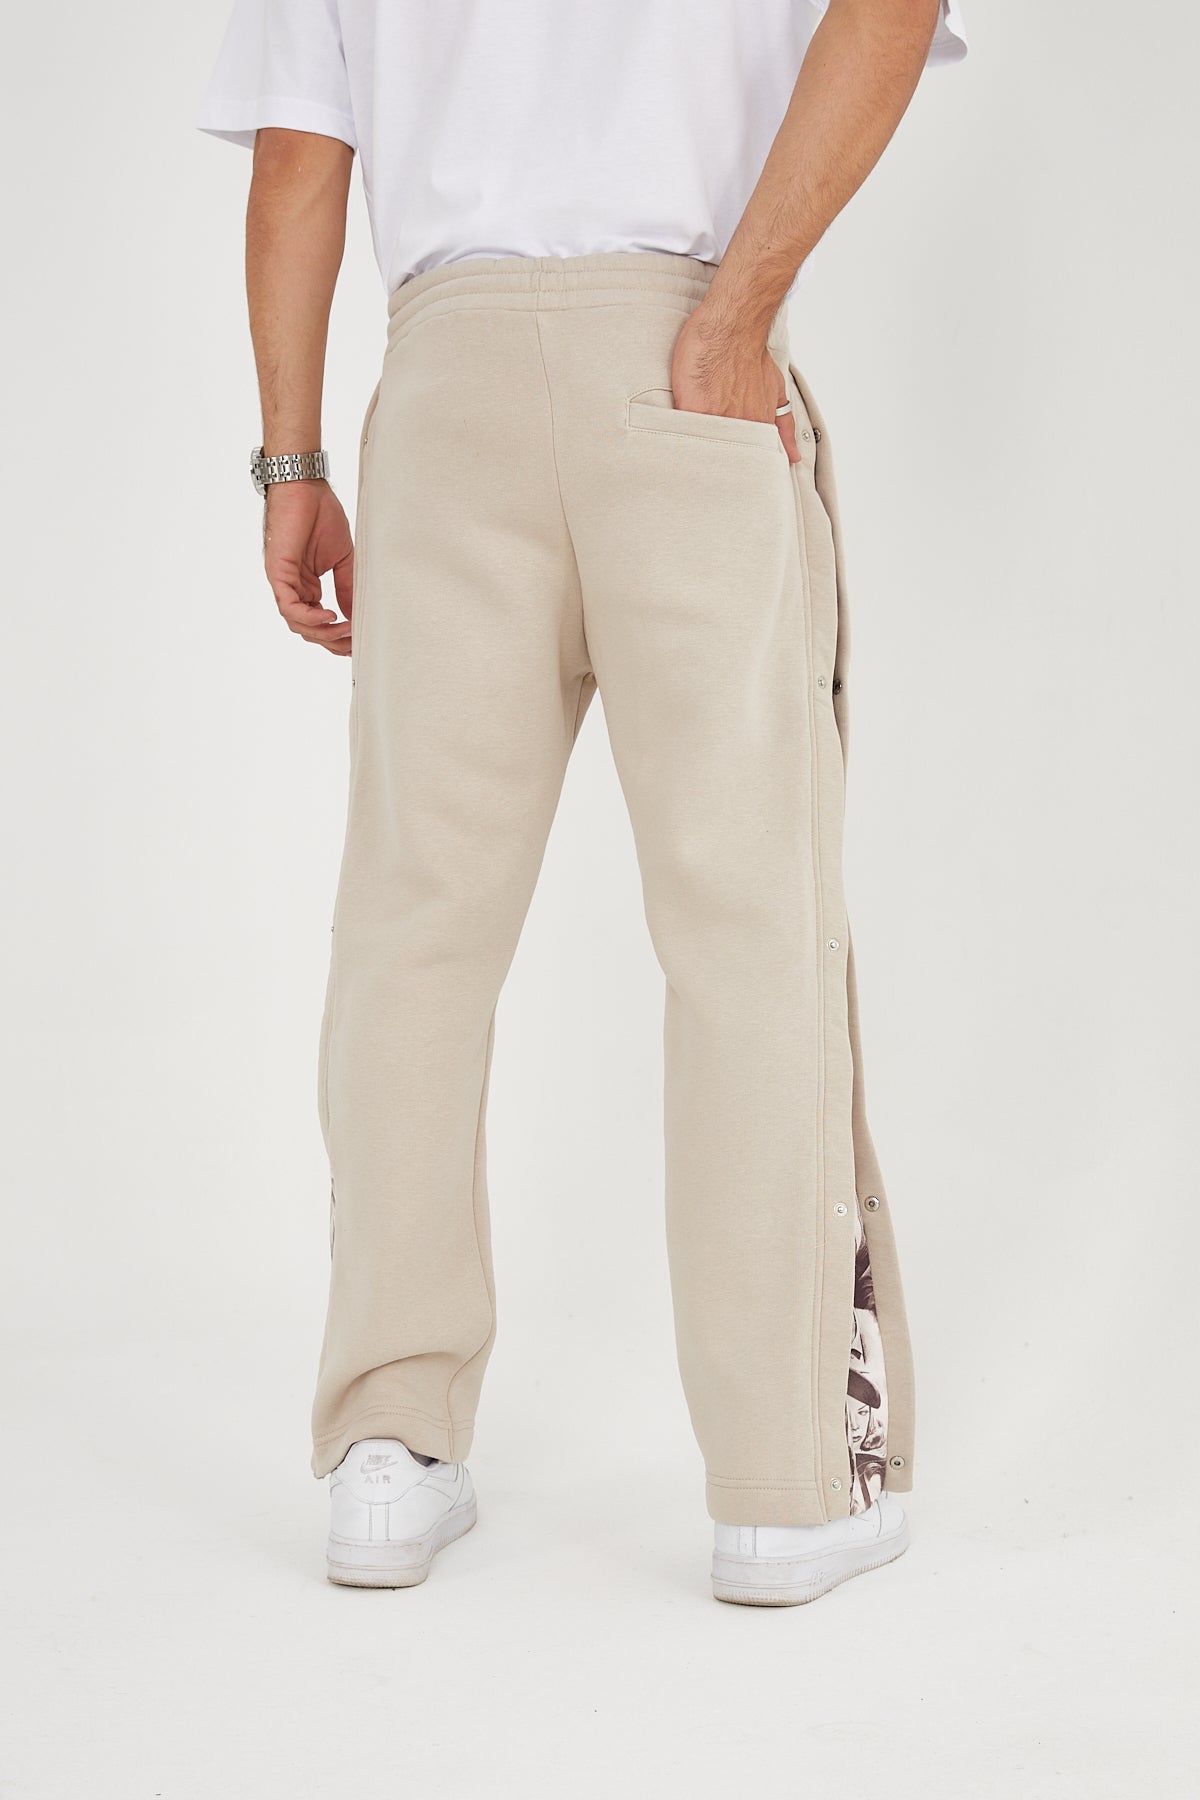 SWEATPANTS - THE ICONS OF THE 60s - BEIGE